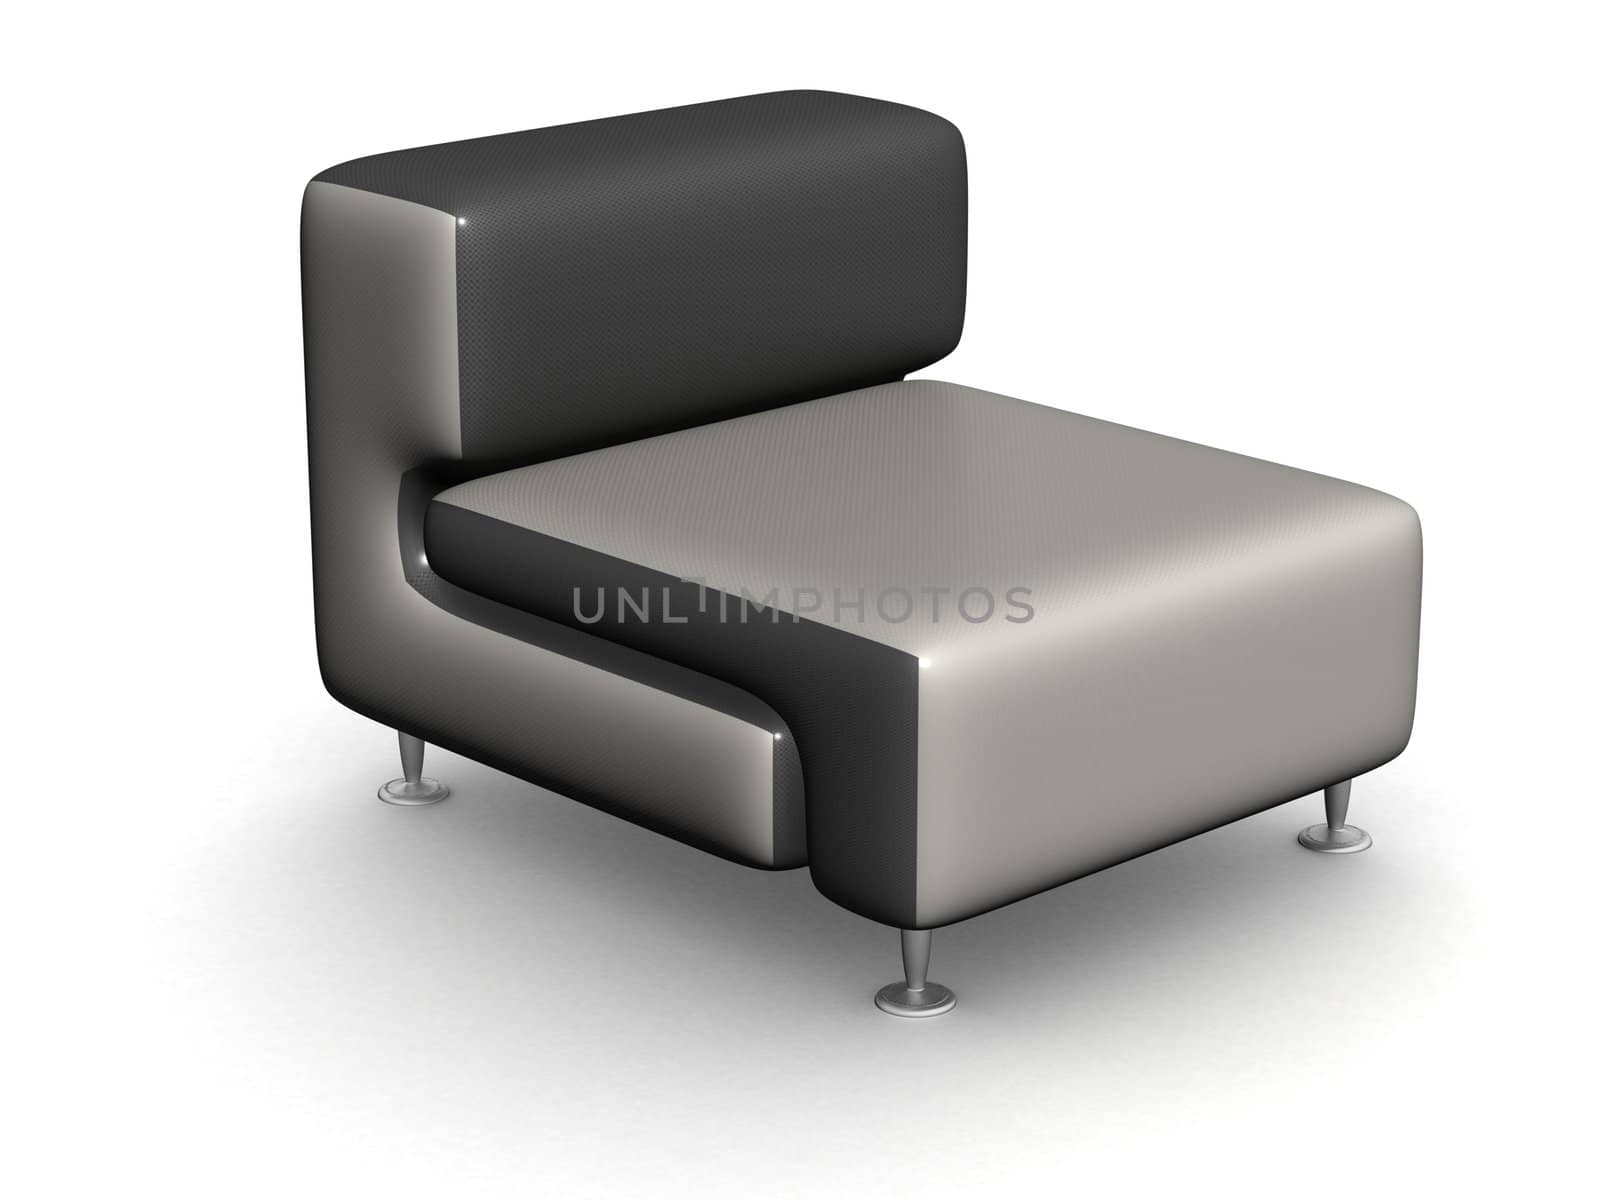 Soft armchair on a white background. 3D image.